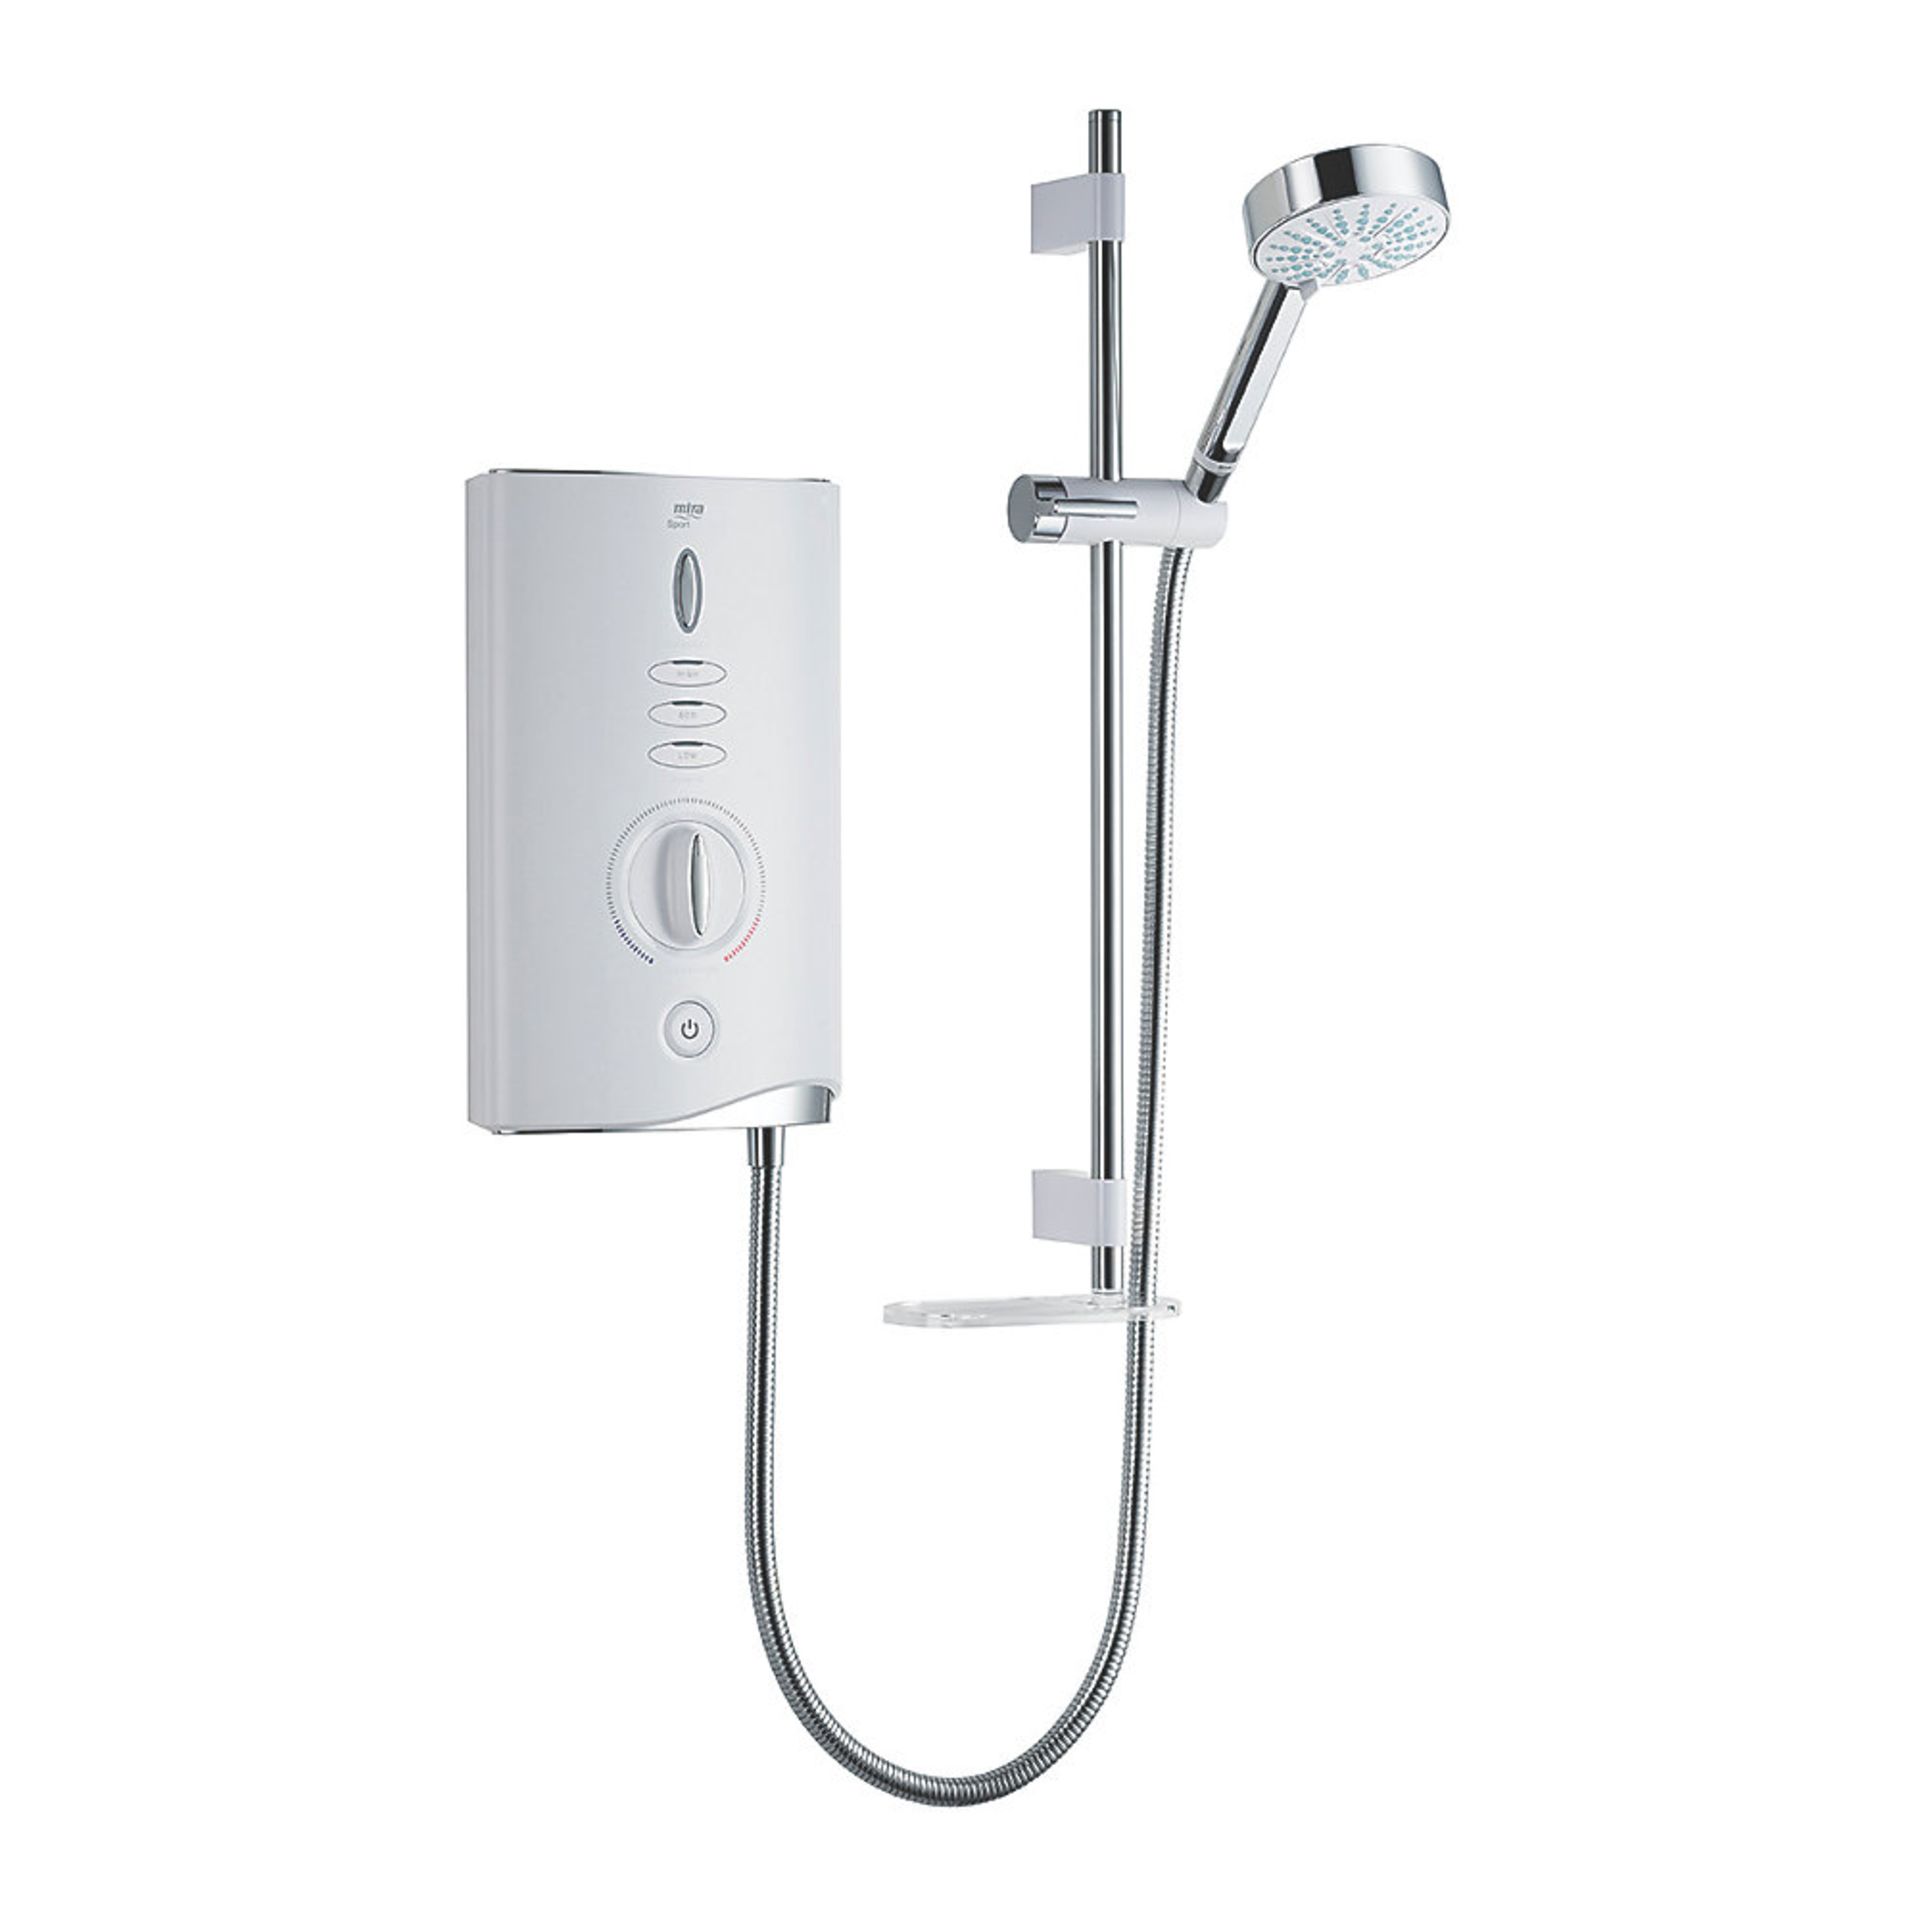 (QQ9) Mira Sport Max with Airboost (10.8kW). RRP £469.99. A world first for electric showers. ... - Image 2 of 2